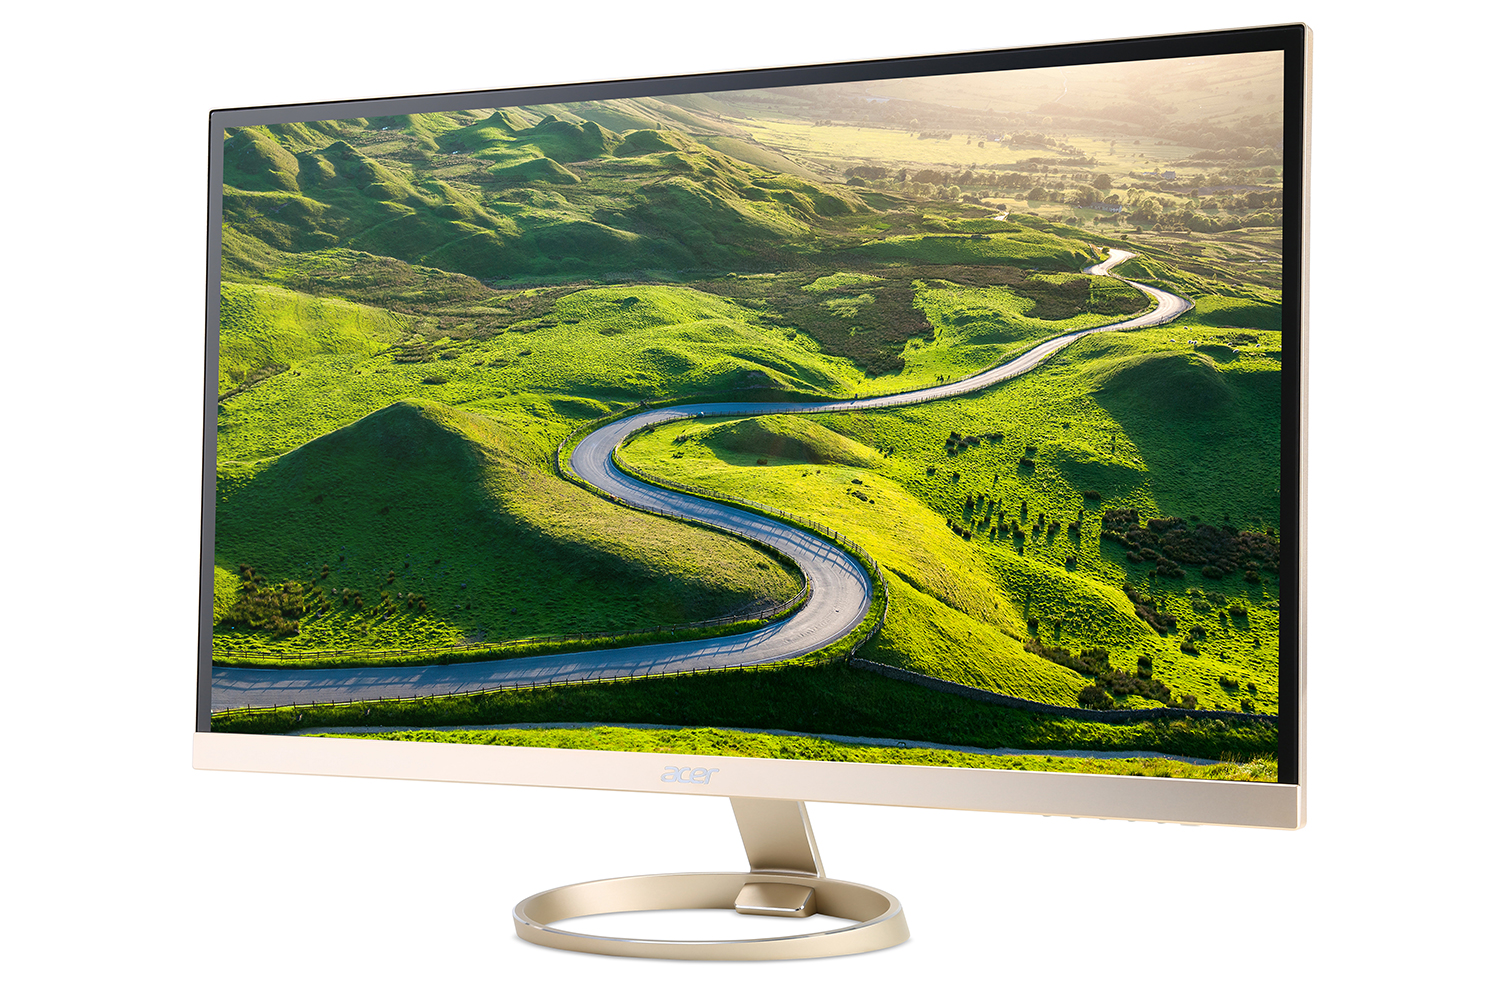 acer computing announce ces 2016 h277hu left angle